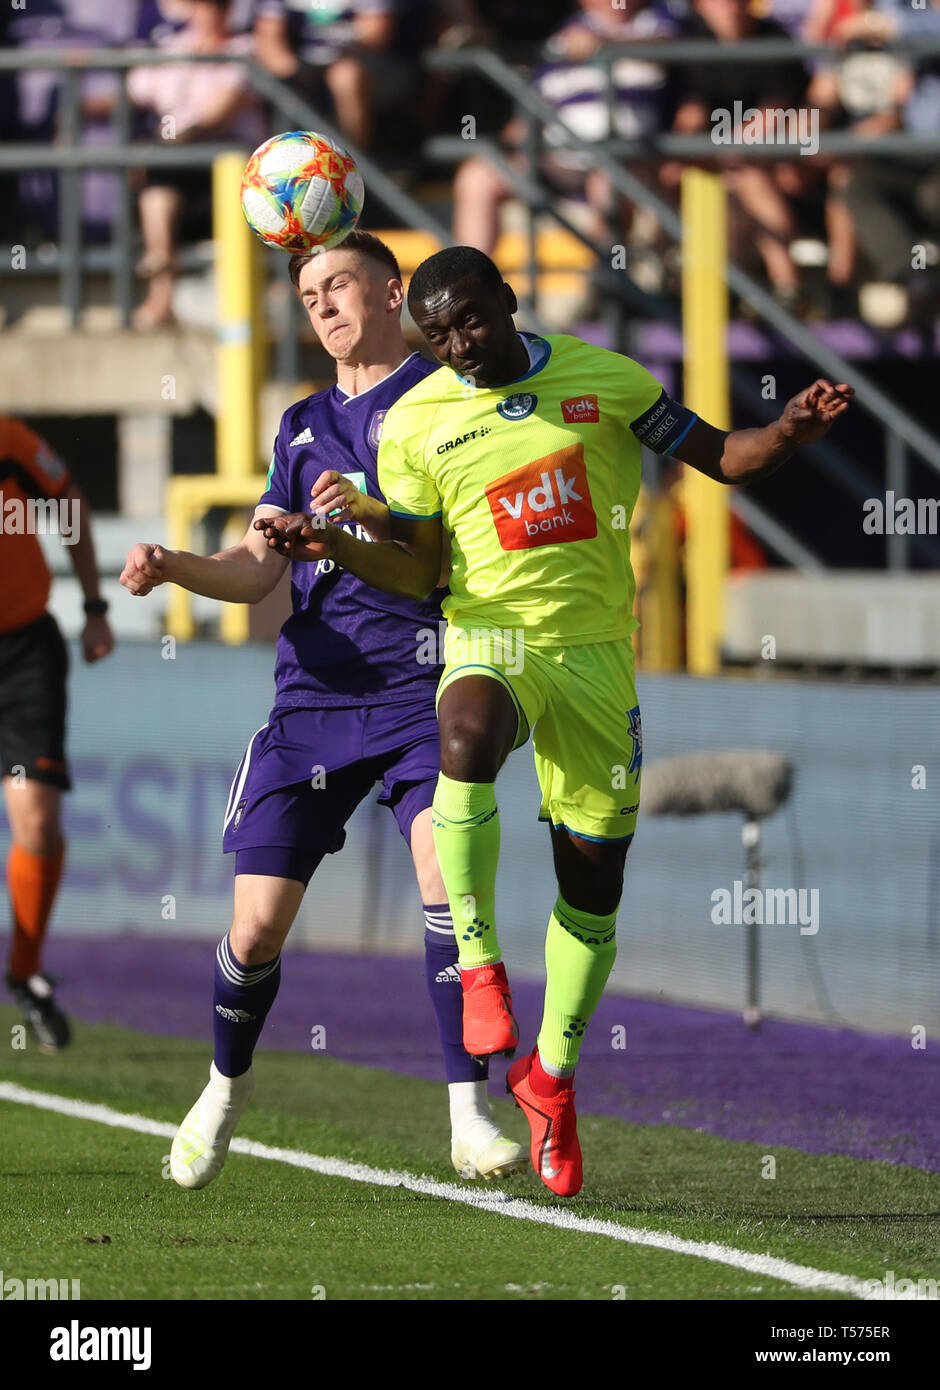 Brussels, Belgium. 21st Apr, 2019. BRUSSELS, BELGIUM - APRIL 21: Alexis Saelemaekers of Anderlecht and Nana Asare of Kaa Gent fight for the ball during the Jupiler Pro League play-off 1 match (day 5) between Rsc Anderlecht and Kaa Gent on April 21, 2019 in Brussels, Belgium. (Photo by Vinc Credit: Pro Shots/Alamy Live News Stock Photo